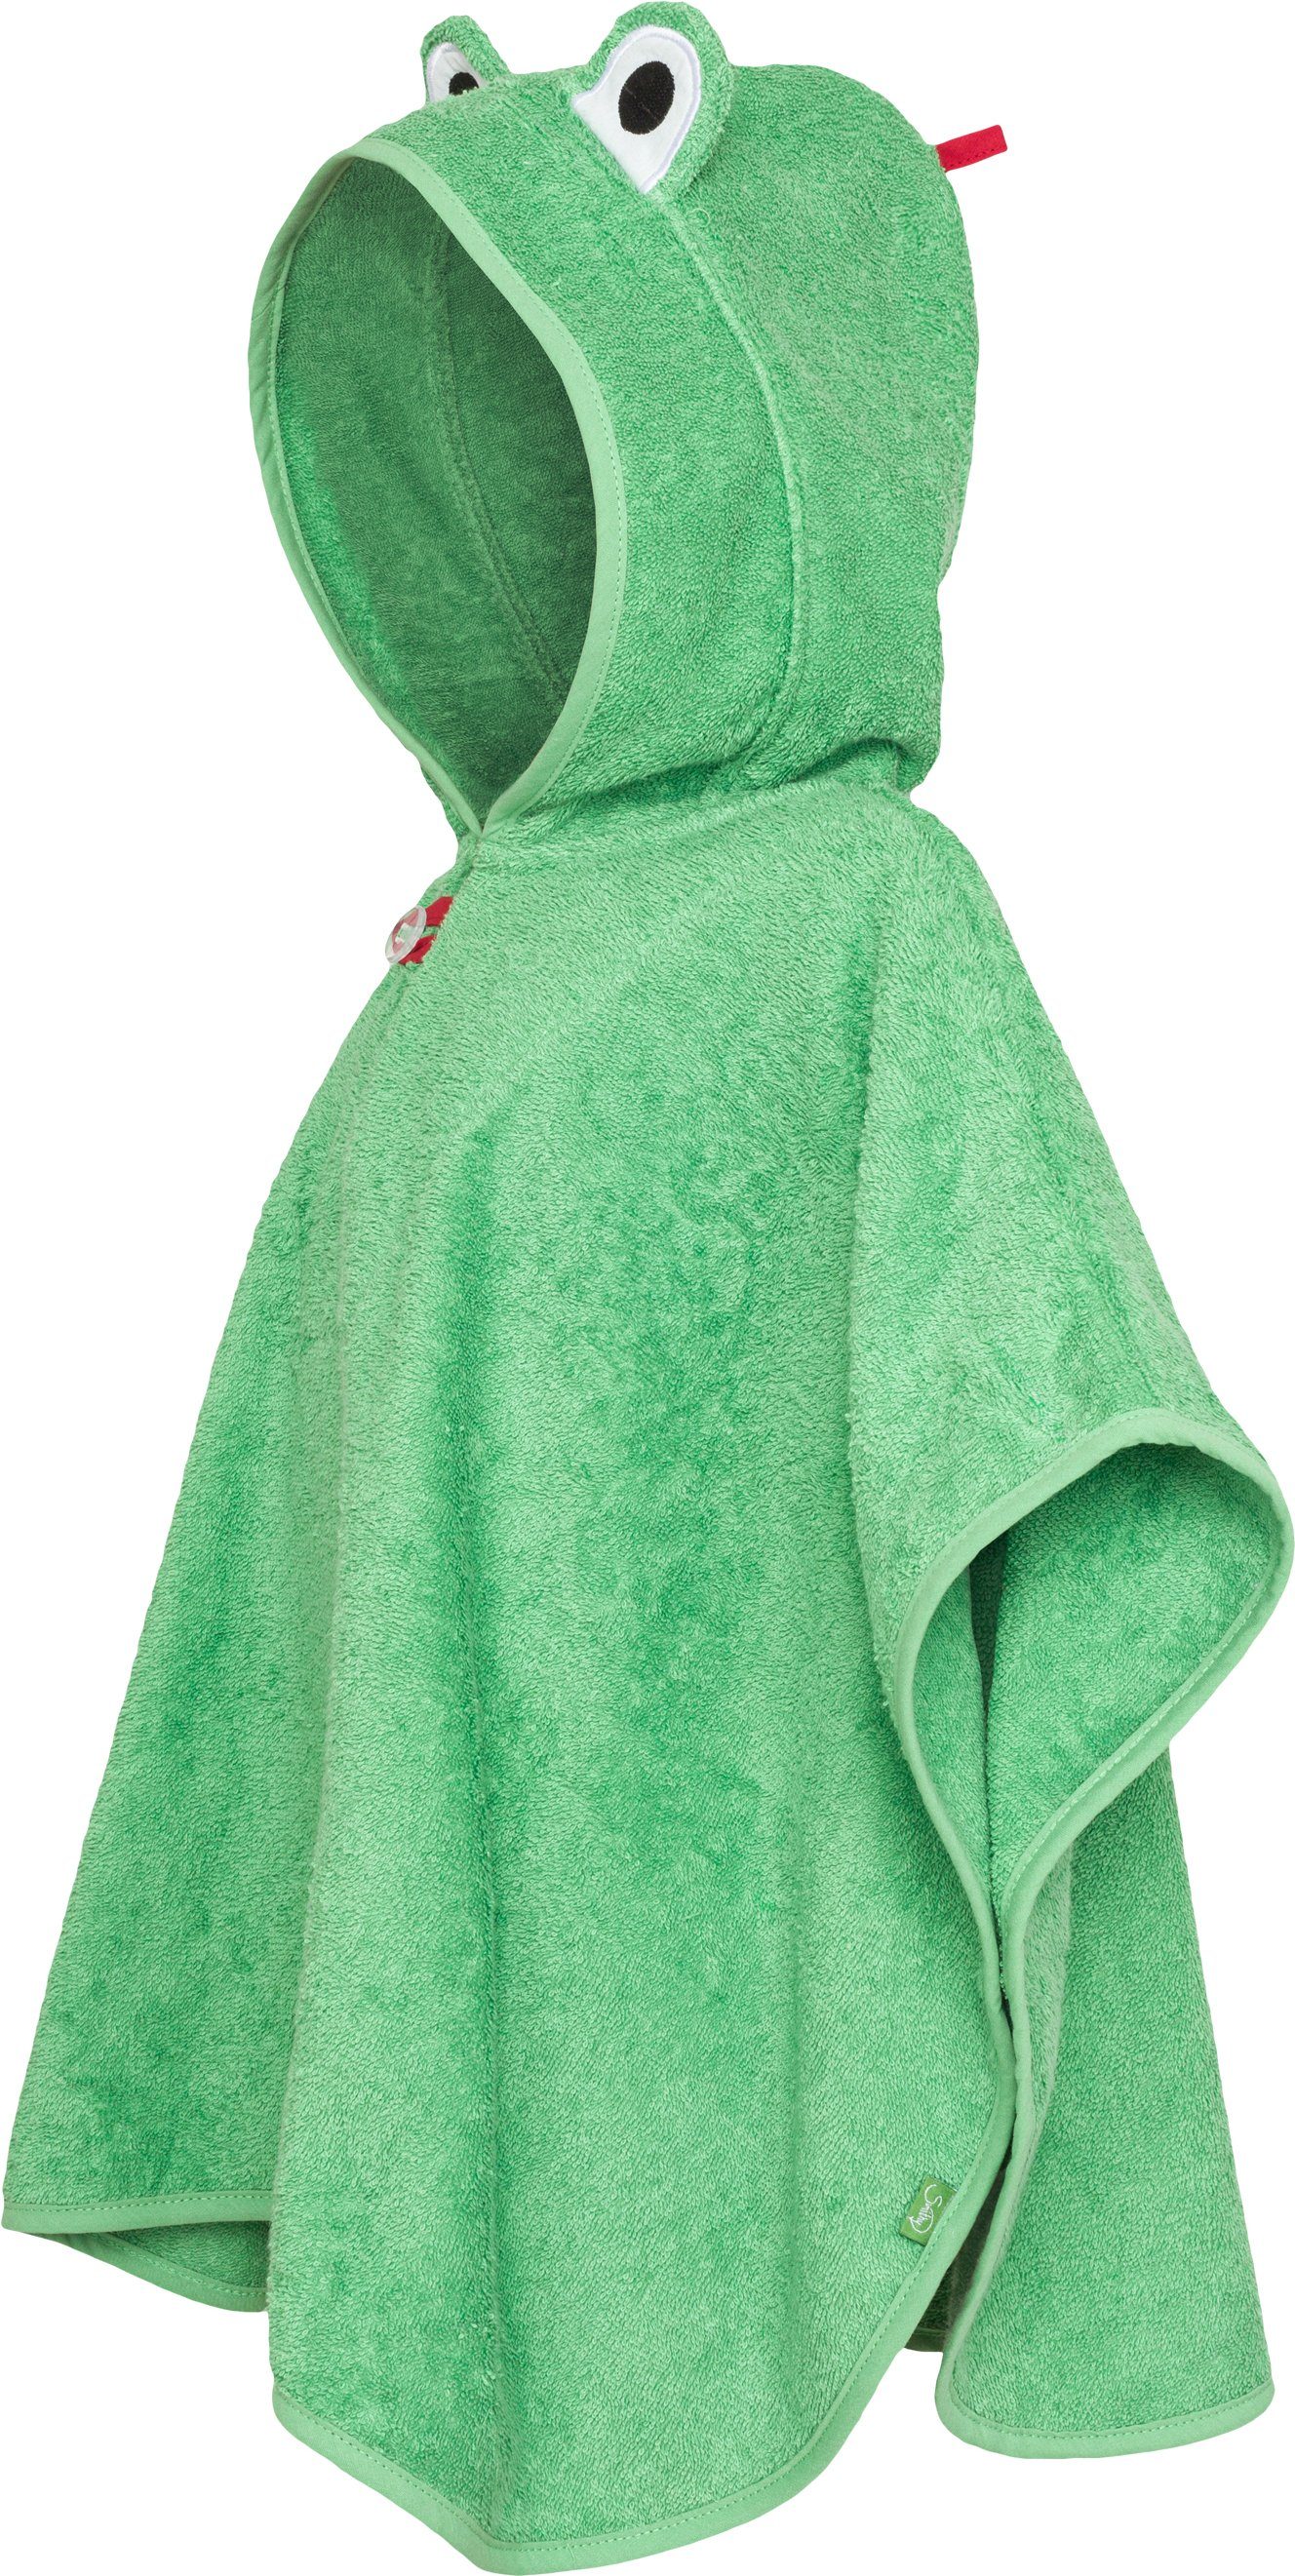 Smithy Frosch, Armloch, Baby in Frottee, Knöpfe made grün, Frottee, Europe Badeponcho am